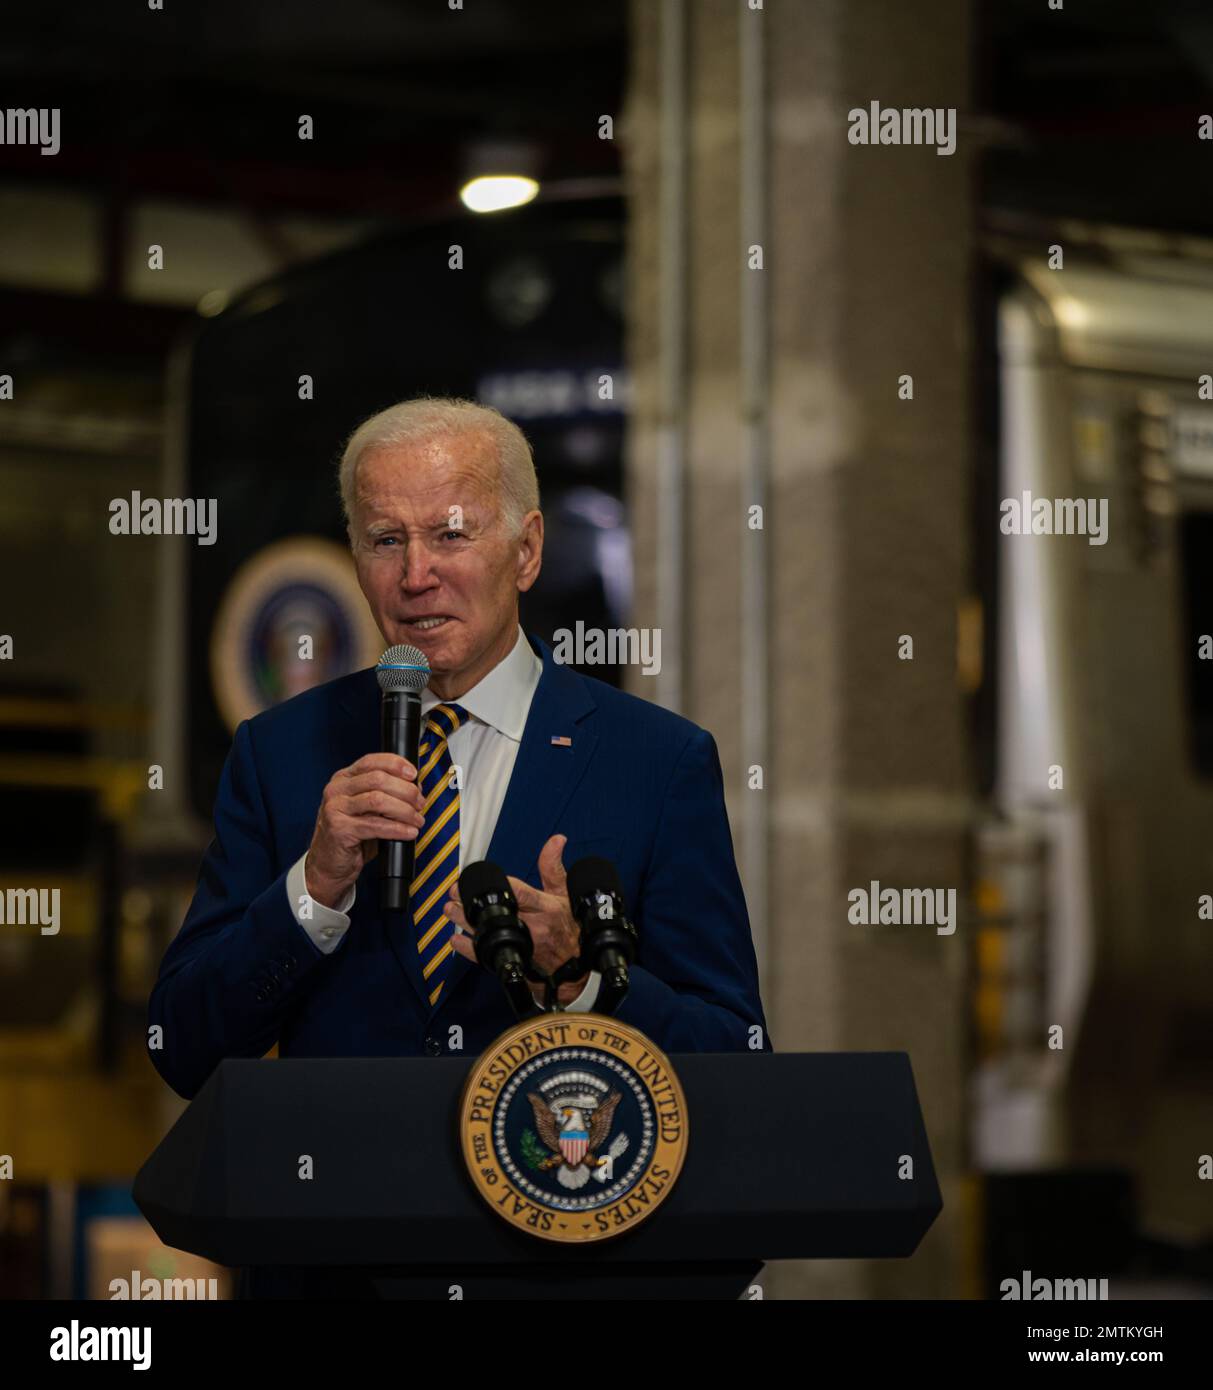 New York City, USA. 31st Jan, 2023. The President of the United States Joe Biden visits New York City on January 31, 2023 to announce funding for Gateway Hudson Tunnel project funded by bipartisan infrastructure law. (Photo by Steve Sanchez/Sipa USA) Credit: Sipa USA/Alamy Live News Stock Photo